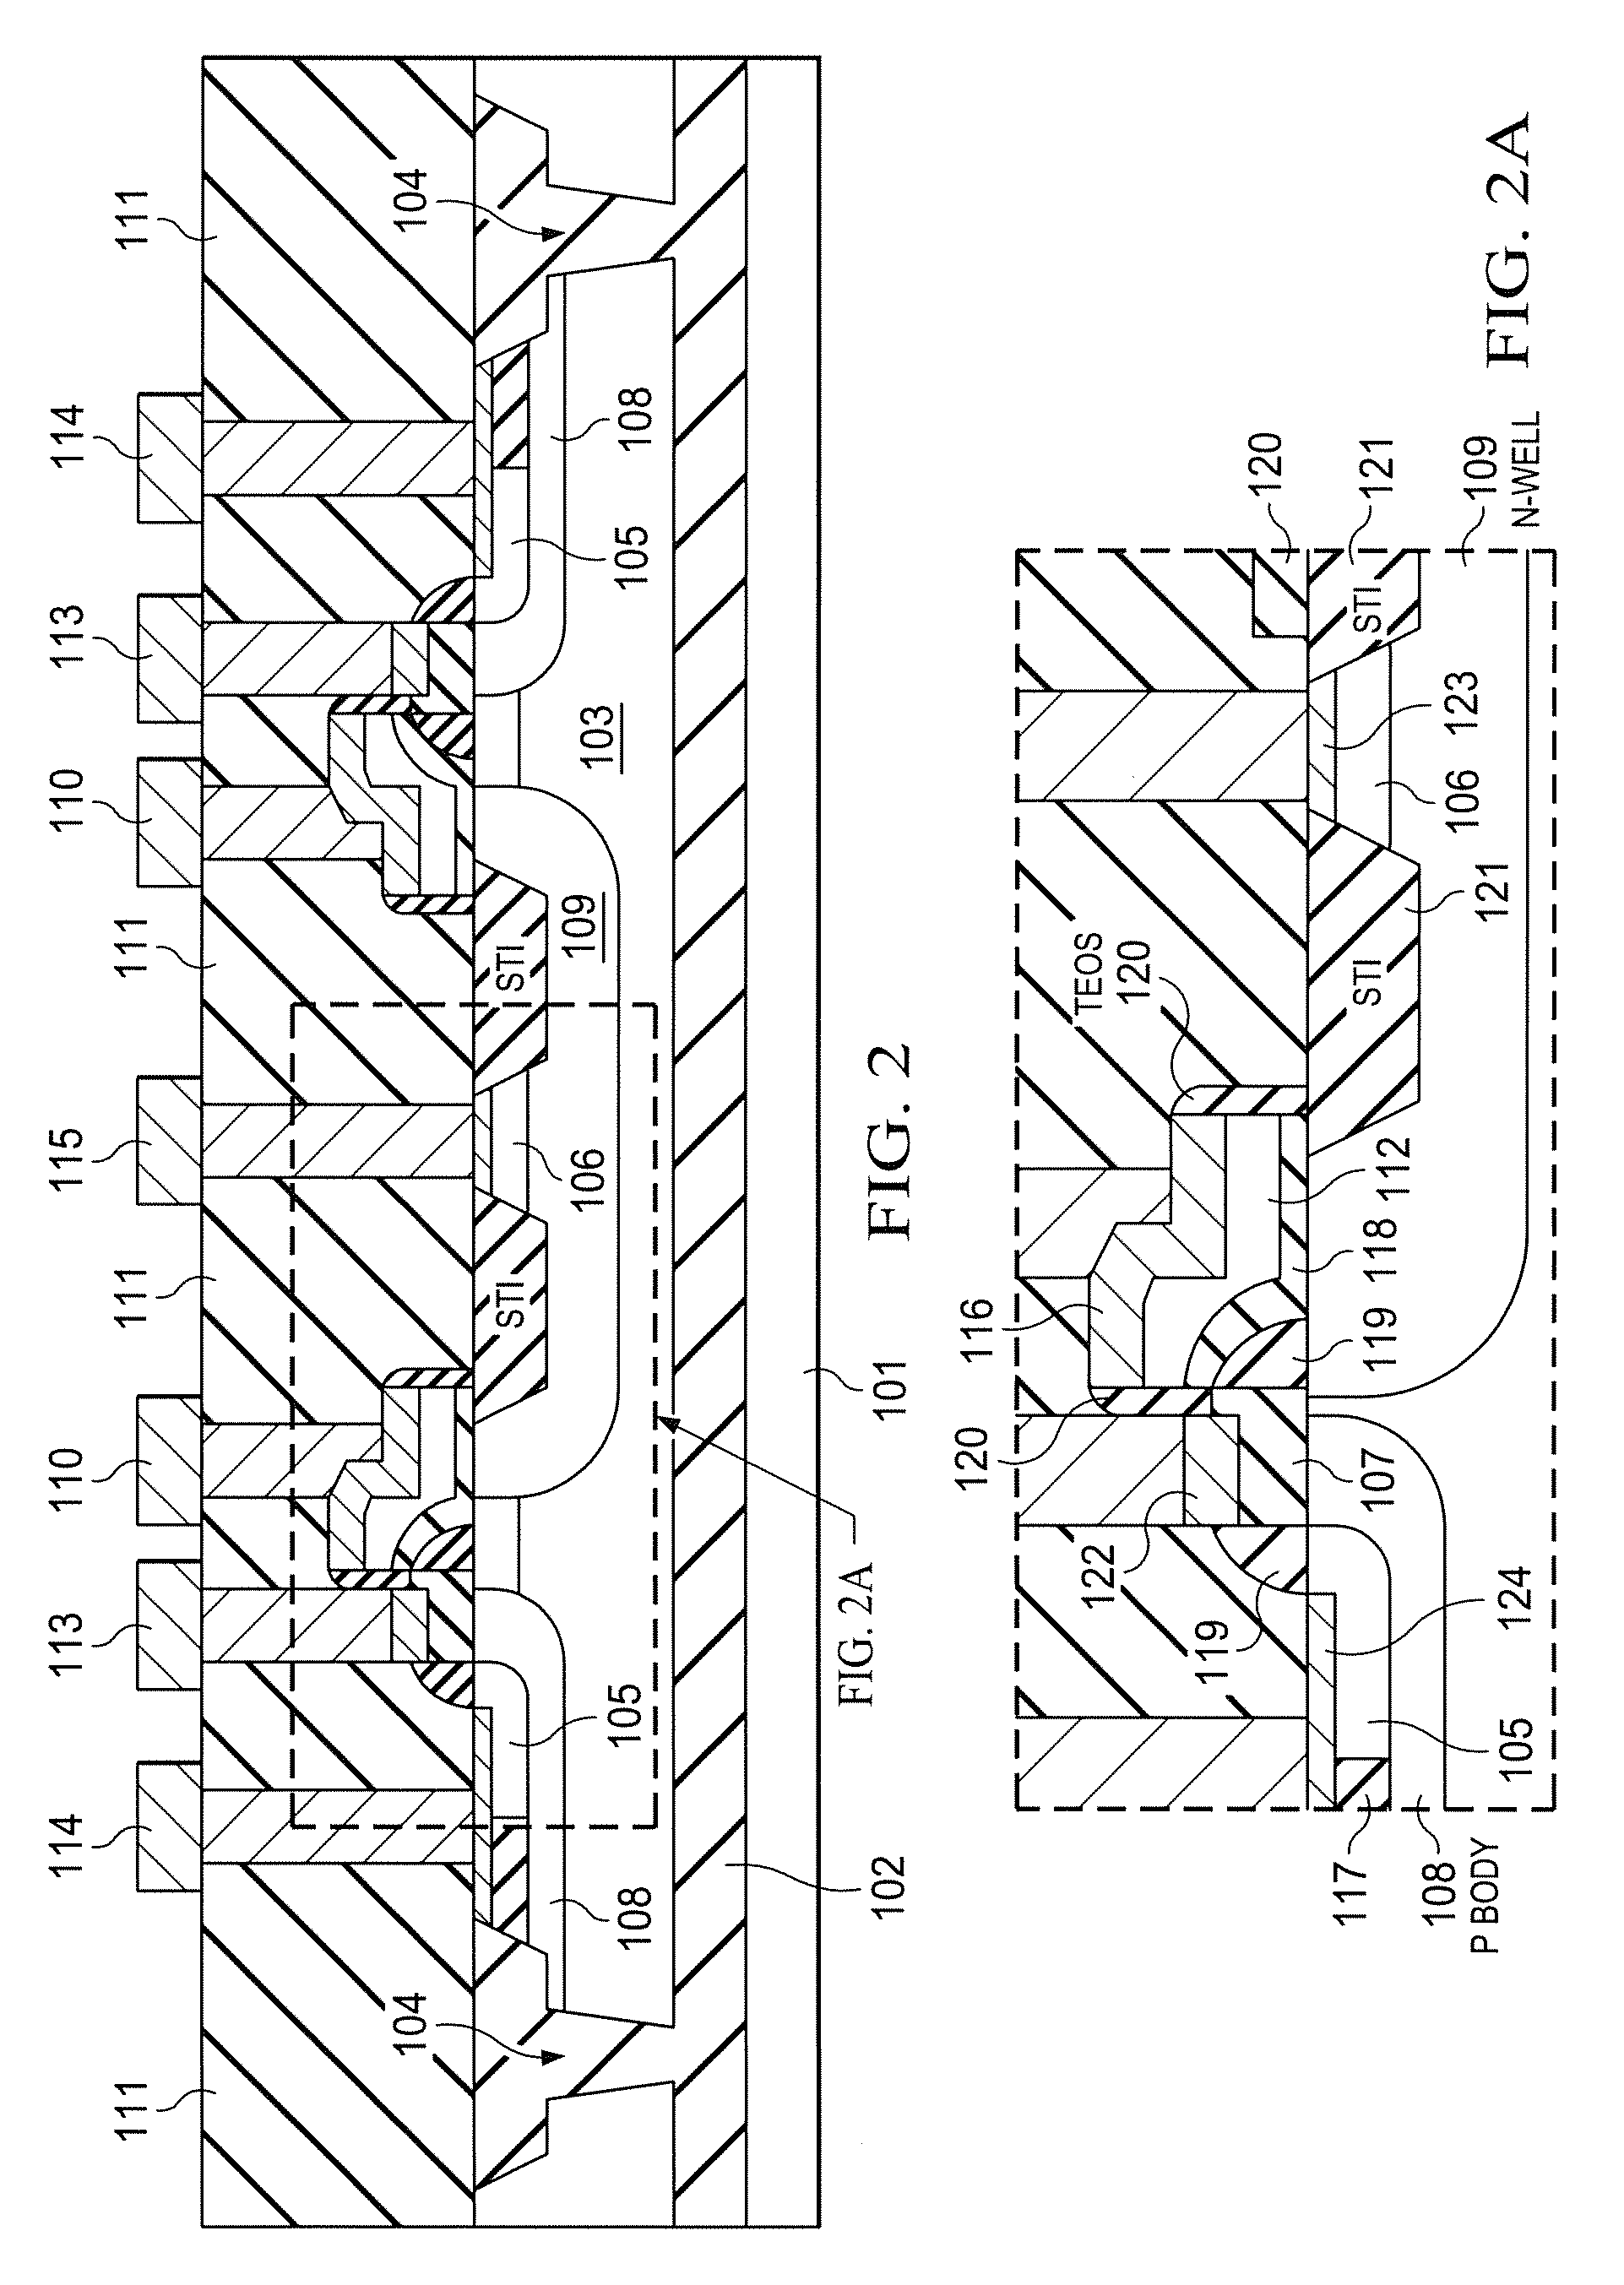 Method of forming a gate shield in an ED-CMOS transistor and a base of a bipolar transistor using BICMOS technologies